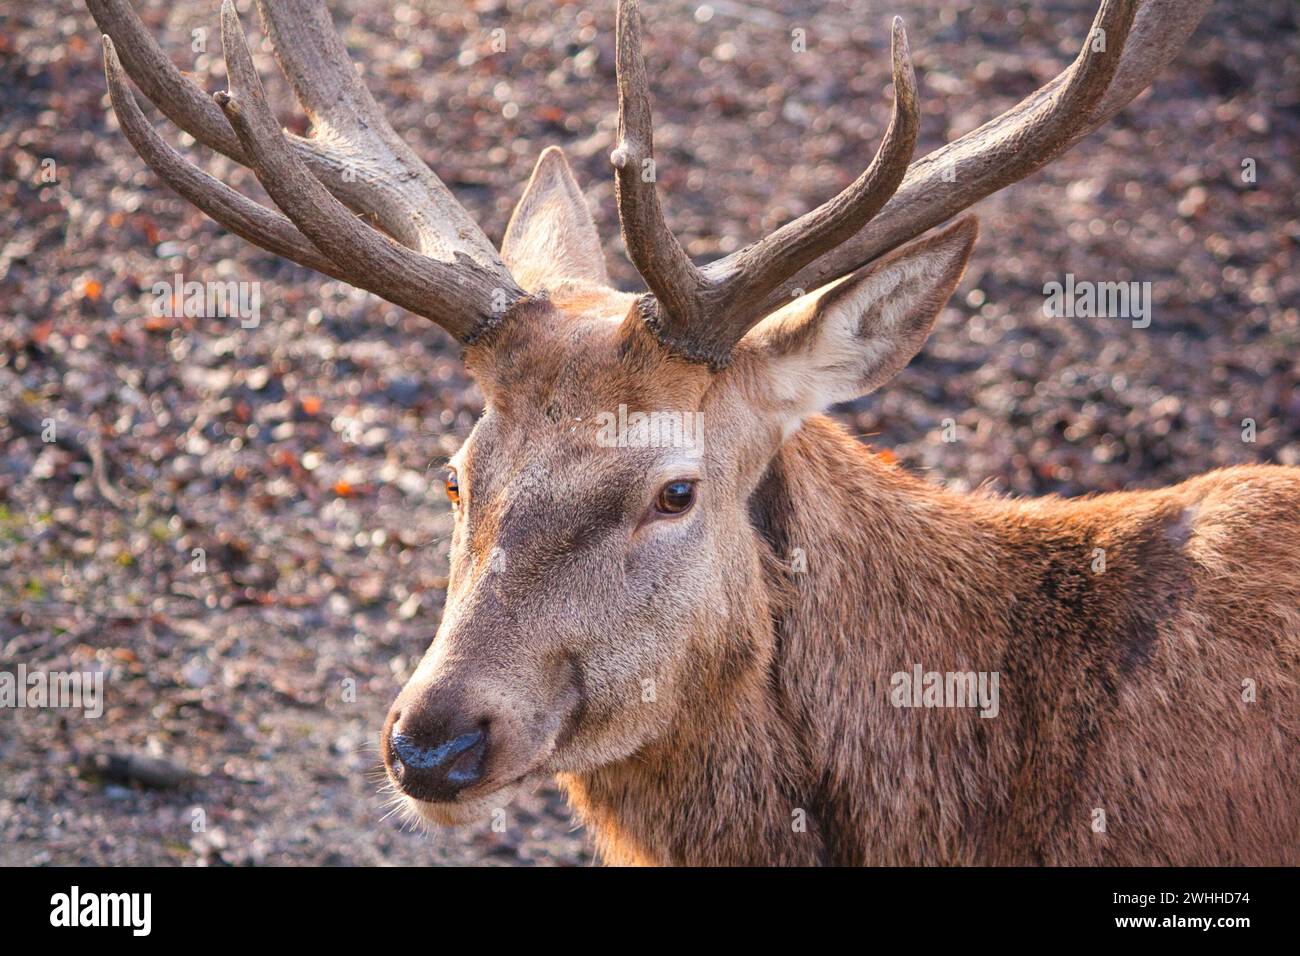 A close-up of a male deer, with the focus on its head and upper body. The deer has a prominent fully grown set of antlers. Stock Photo